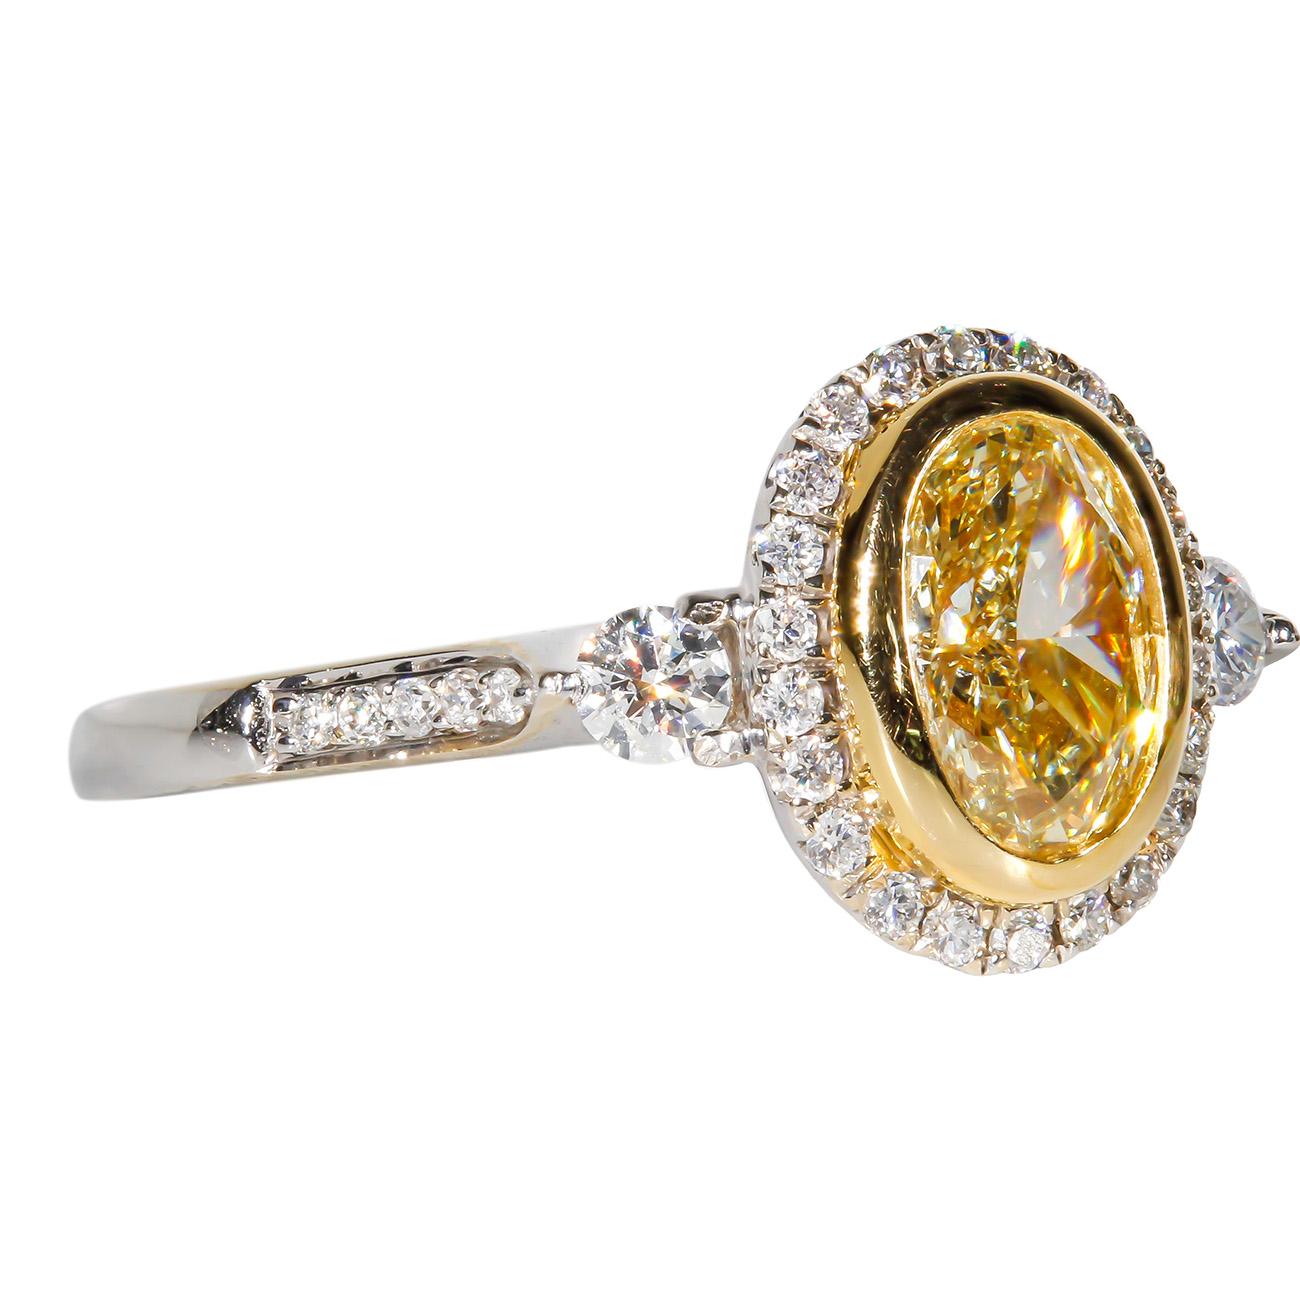 Halo ring in 18K white gold with pre-set rounds and fancy light yellow oval diamond center stone. D1.36ct.t.w. (Center - 1.07ct.)